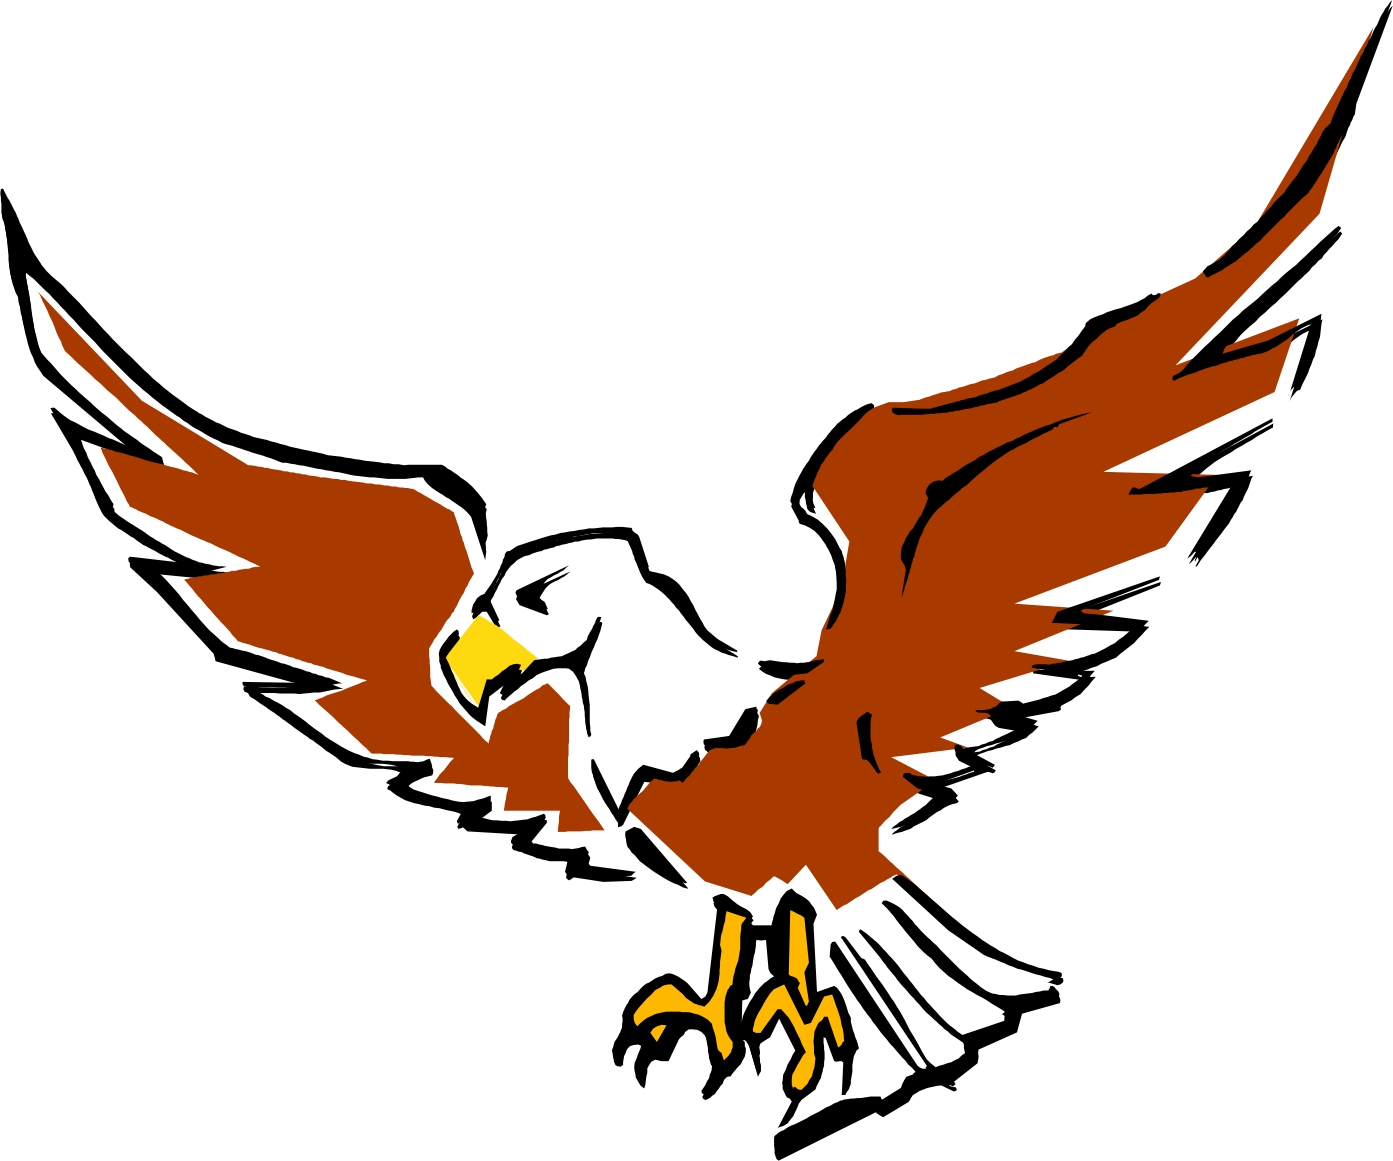 Cartoon Eagle | Page 2 - ClipArt Best - ClipArt Best